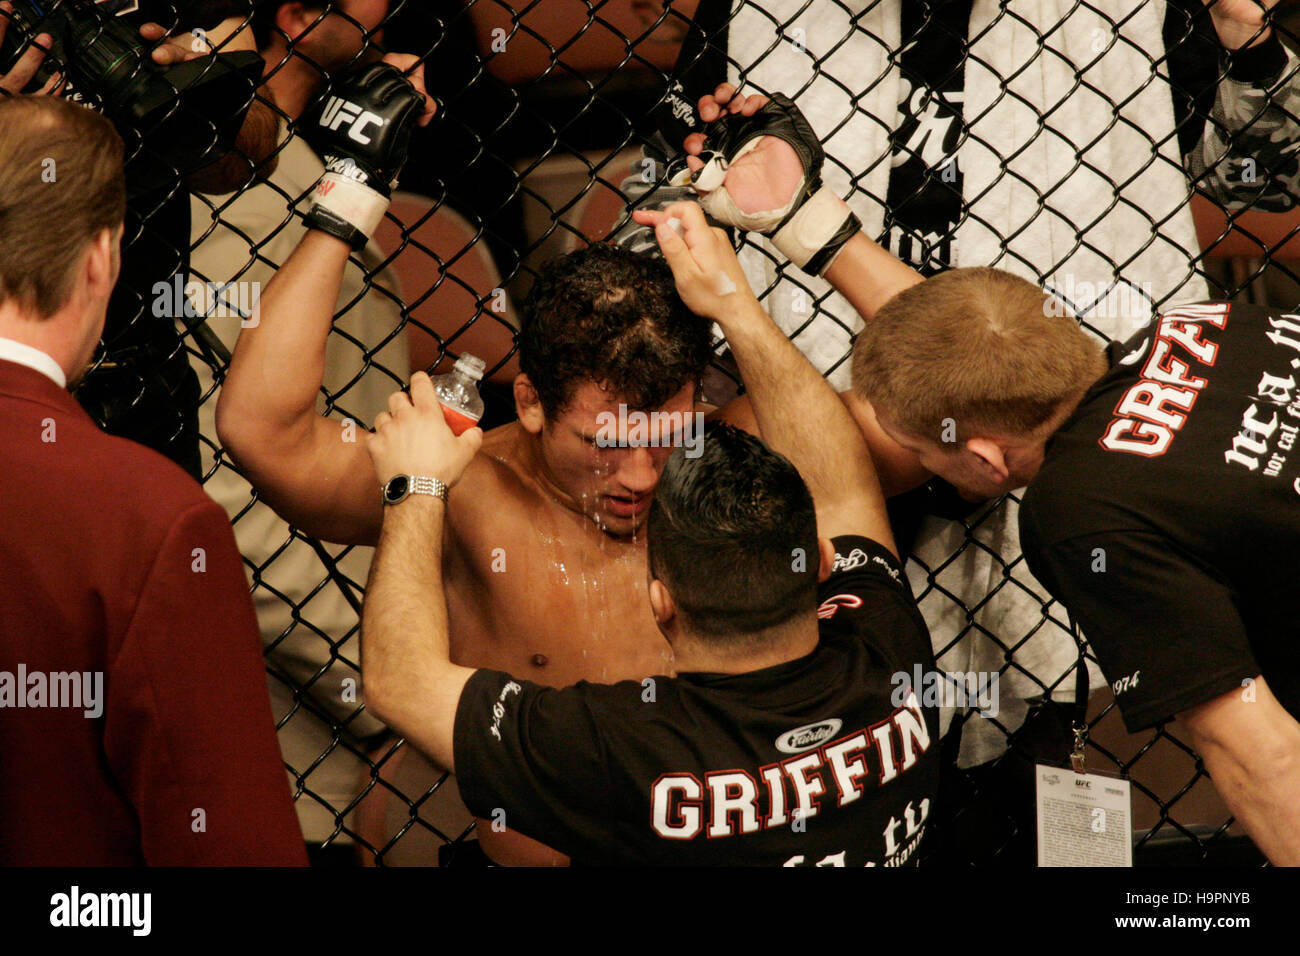 Tyson Griffin at the Ultimate Fighting Champion Championship UFC 67 at the Mandalay Bay Hotel in Las Vegas on Feb. 3, 2007. Photo credit: Francis Specker Stock Photo